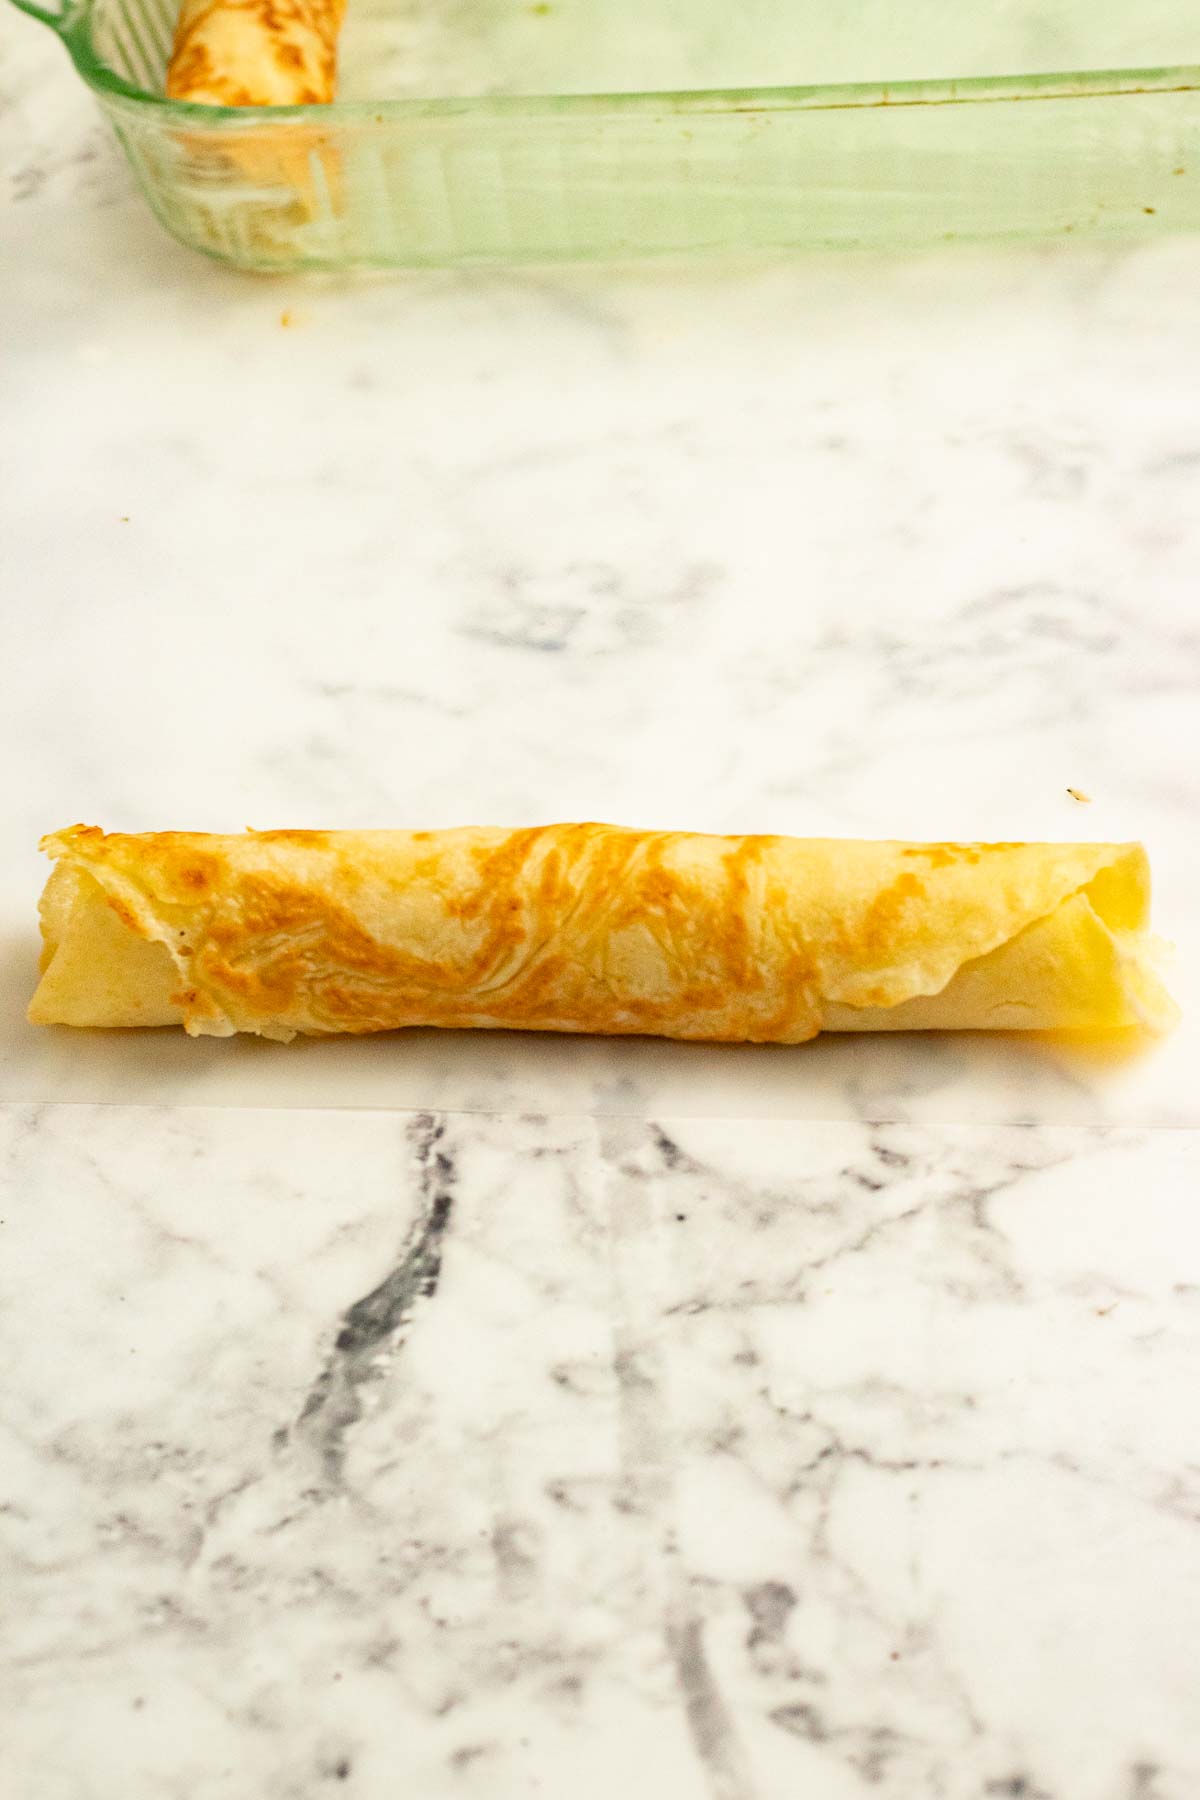 Rolled up chicken crepe.